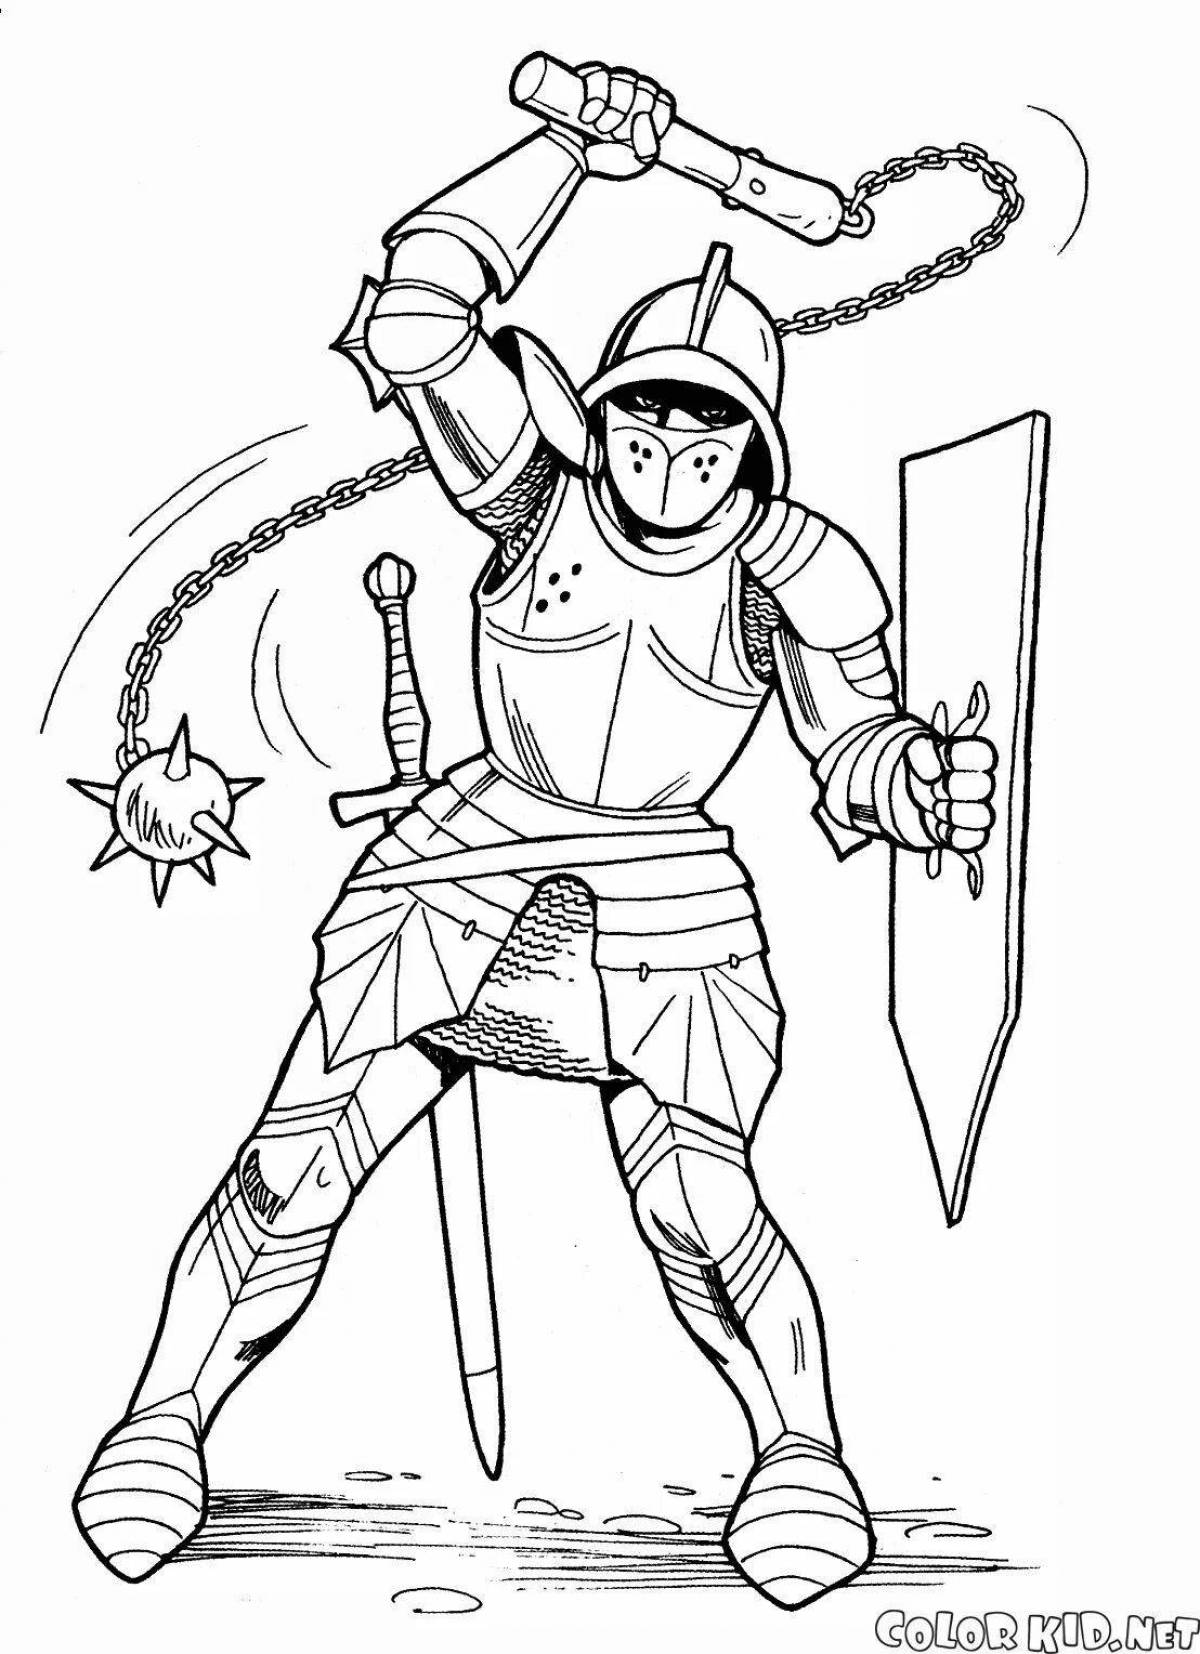 Great coloring book knight in armor